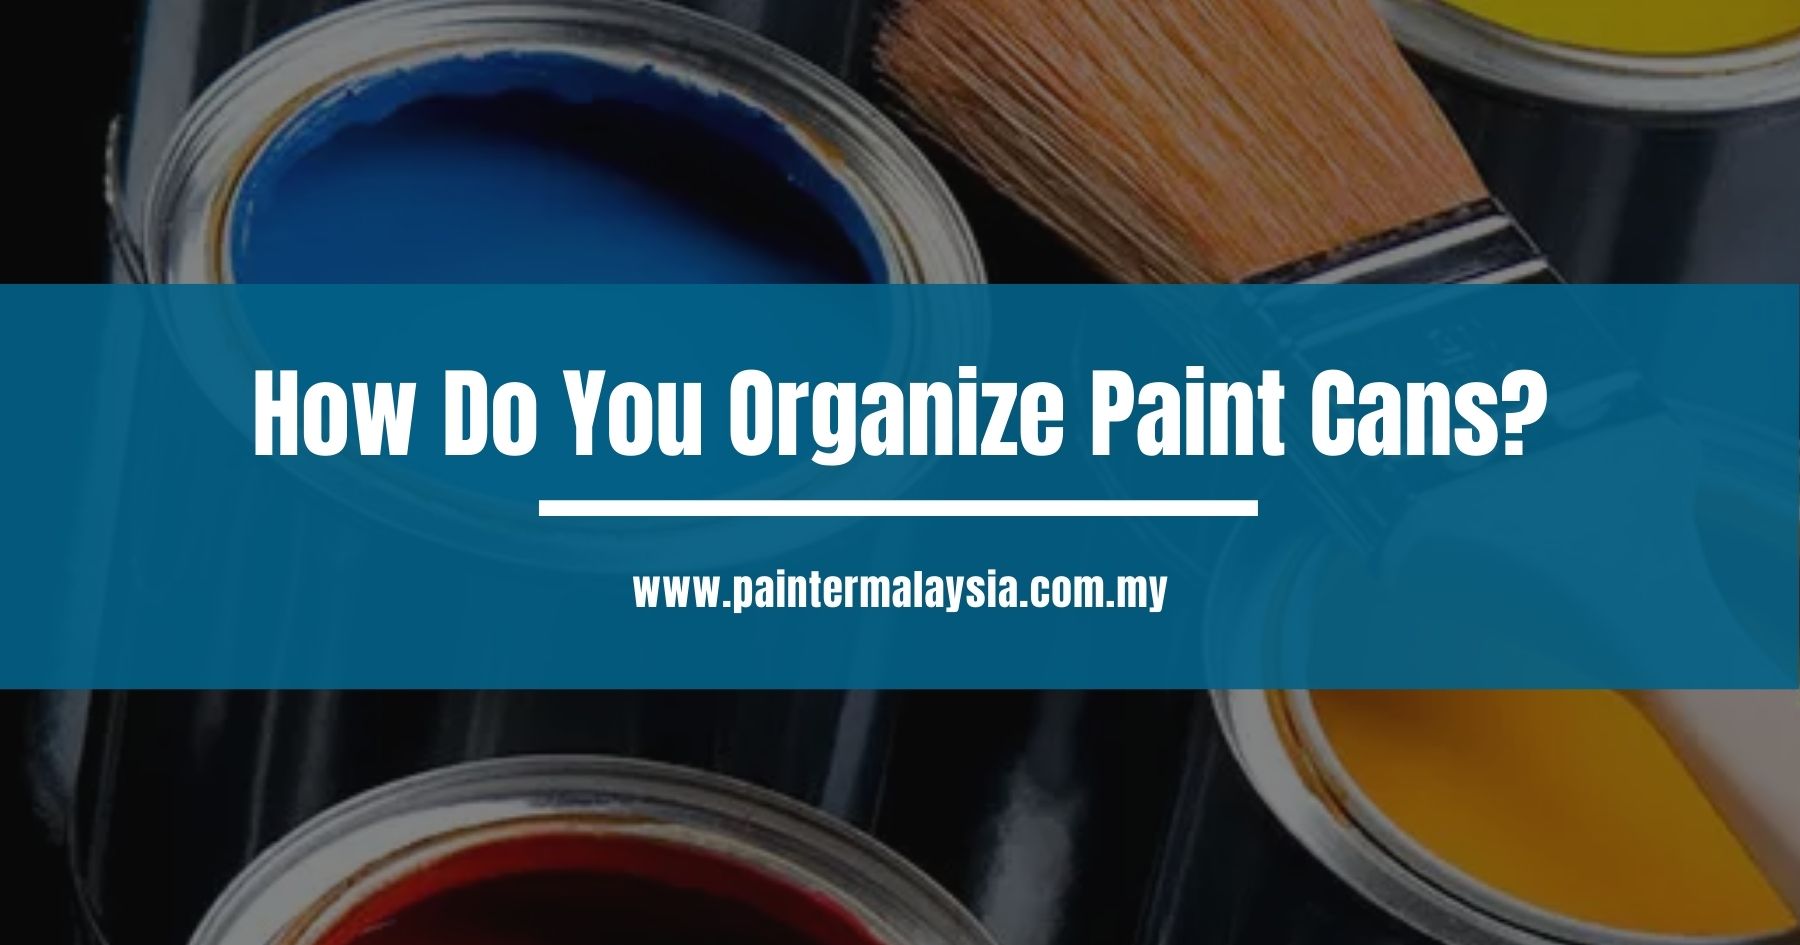 How Do You Organize Paint Cans?